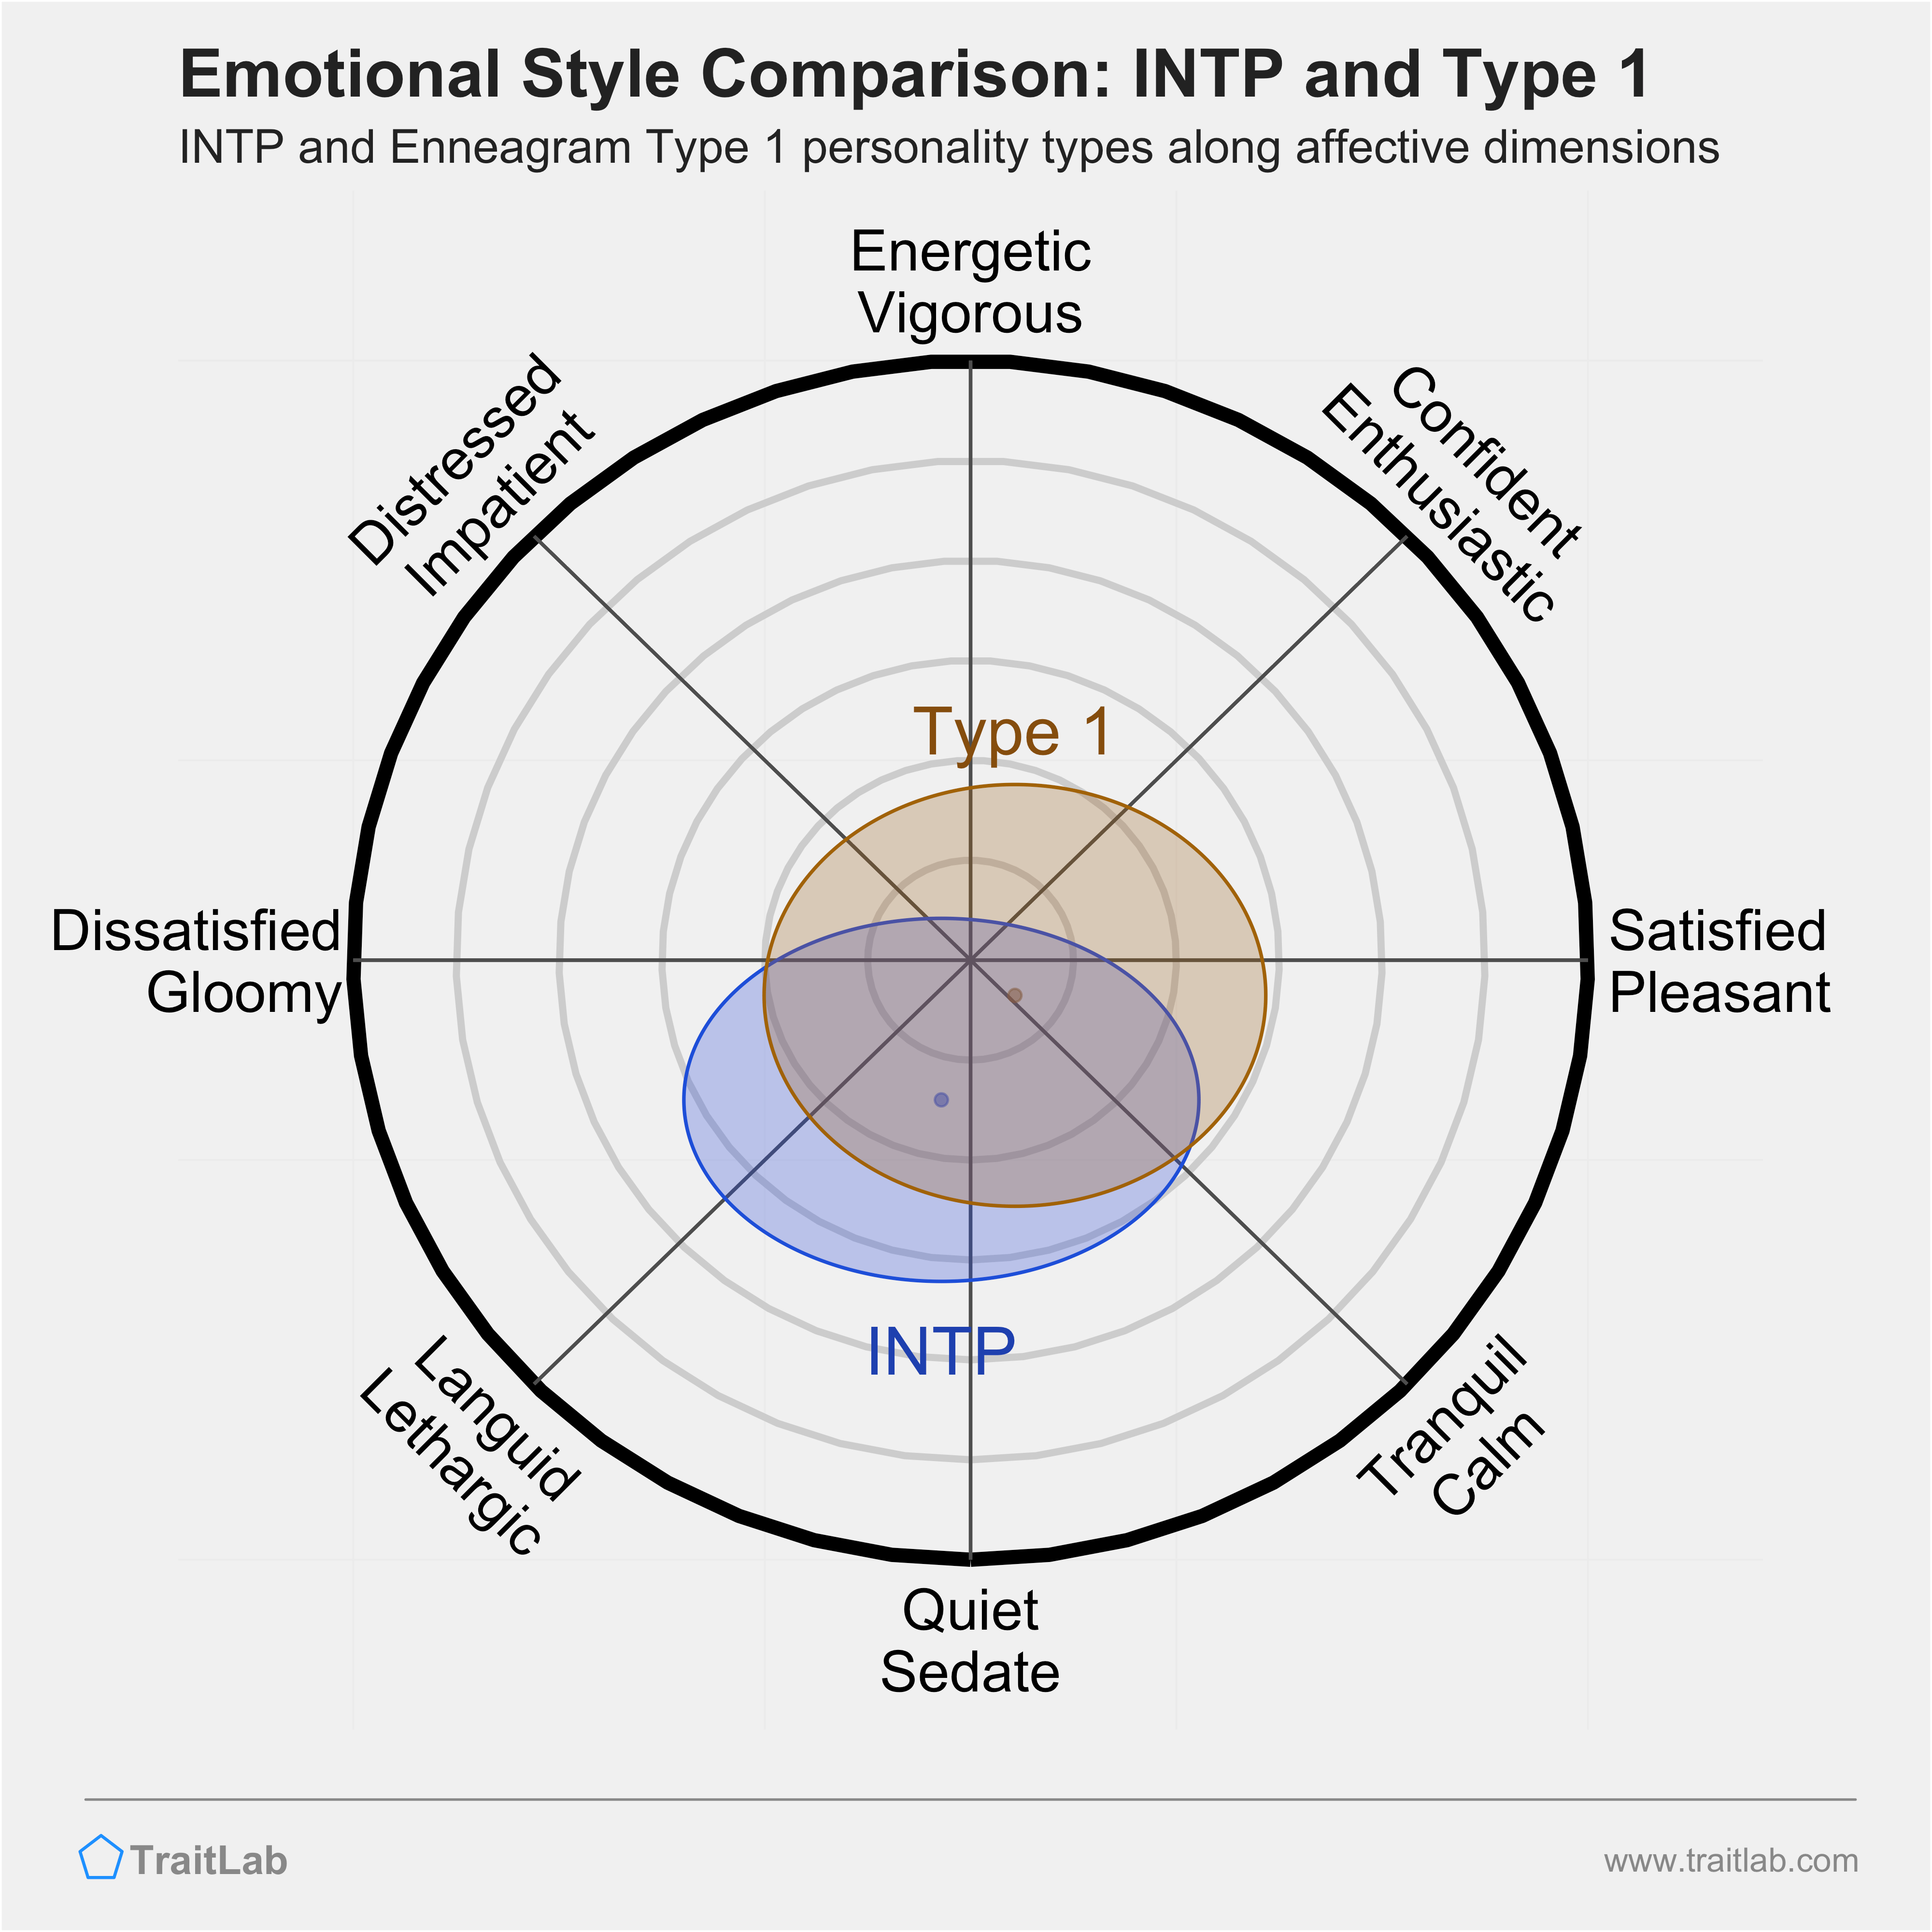 INTP and Type 1 comparison across emotional (affective) dimensions